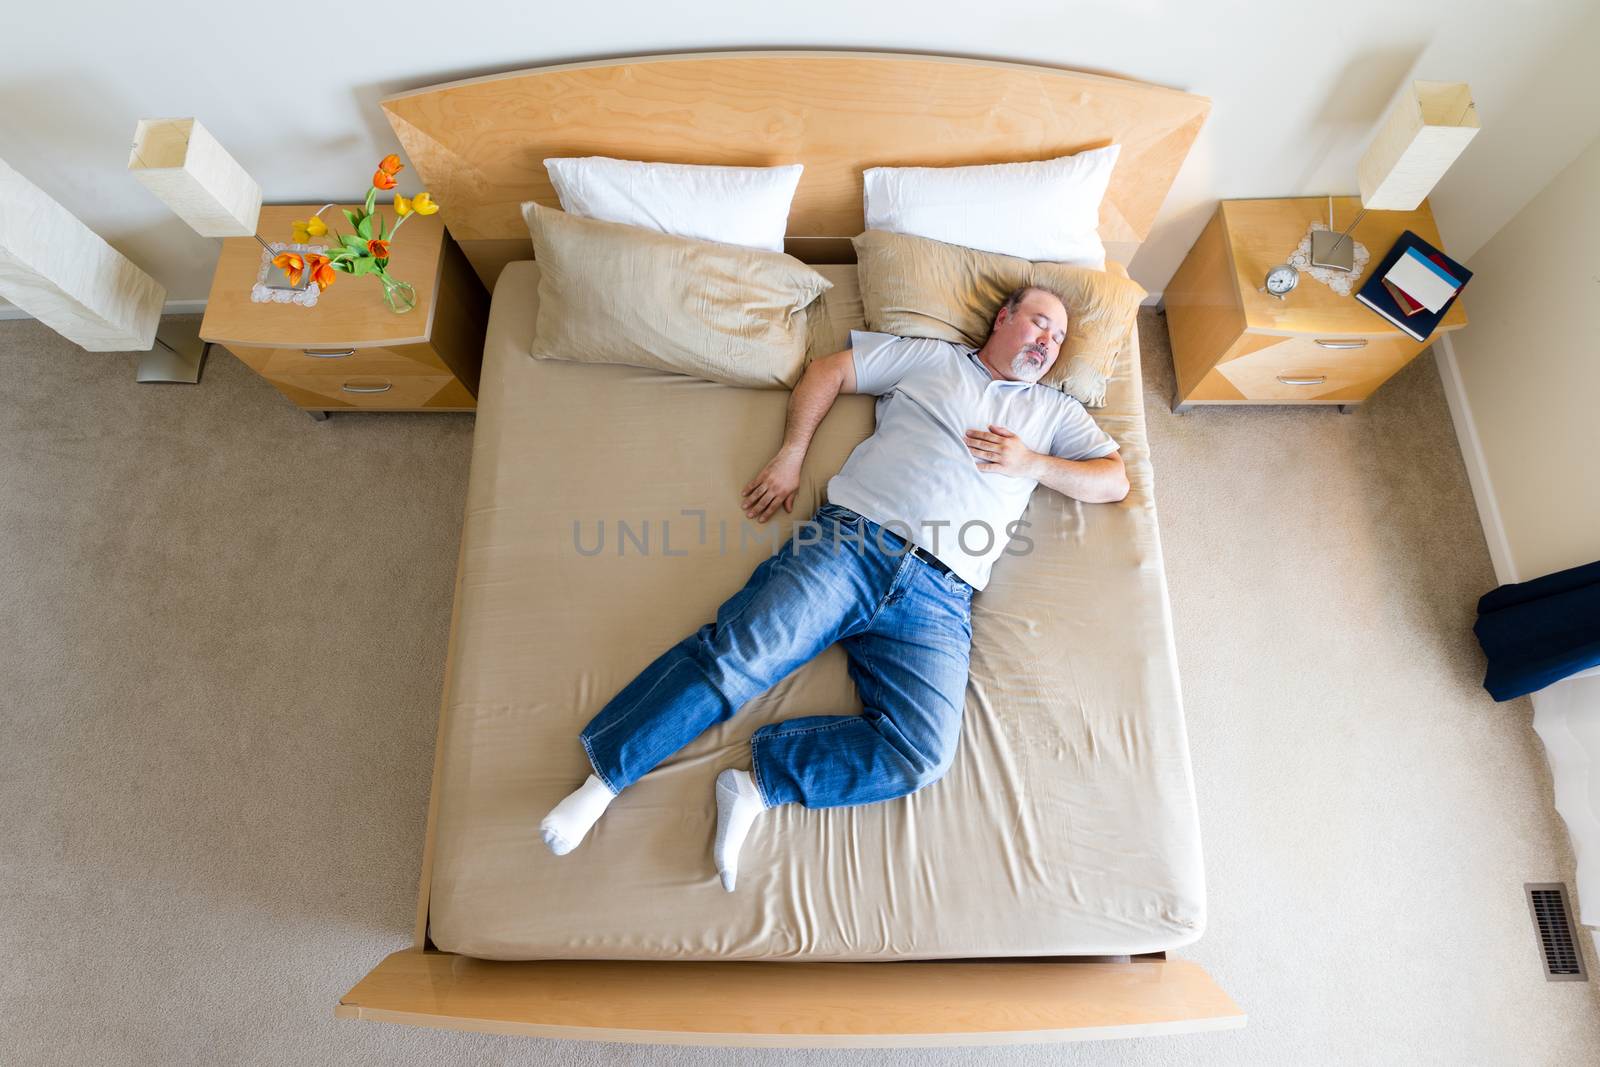 Overhead view of a big overweight middle-aged man with a goatee lying sprawled diagonally in his socks on a king size bed taking a midday nap over the weekend